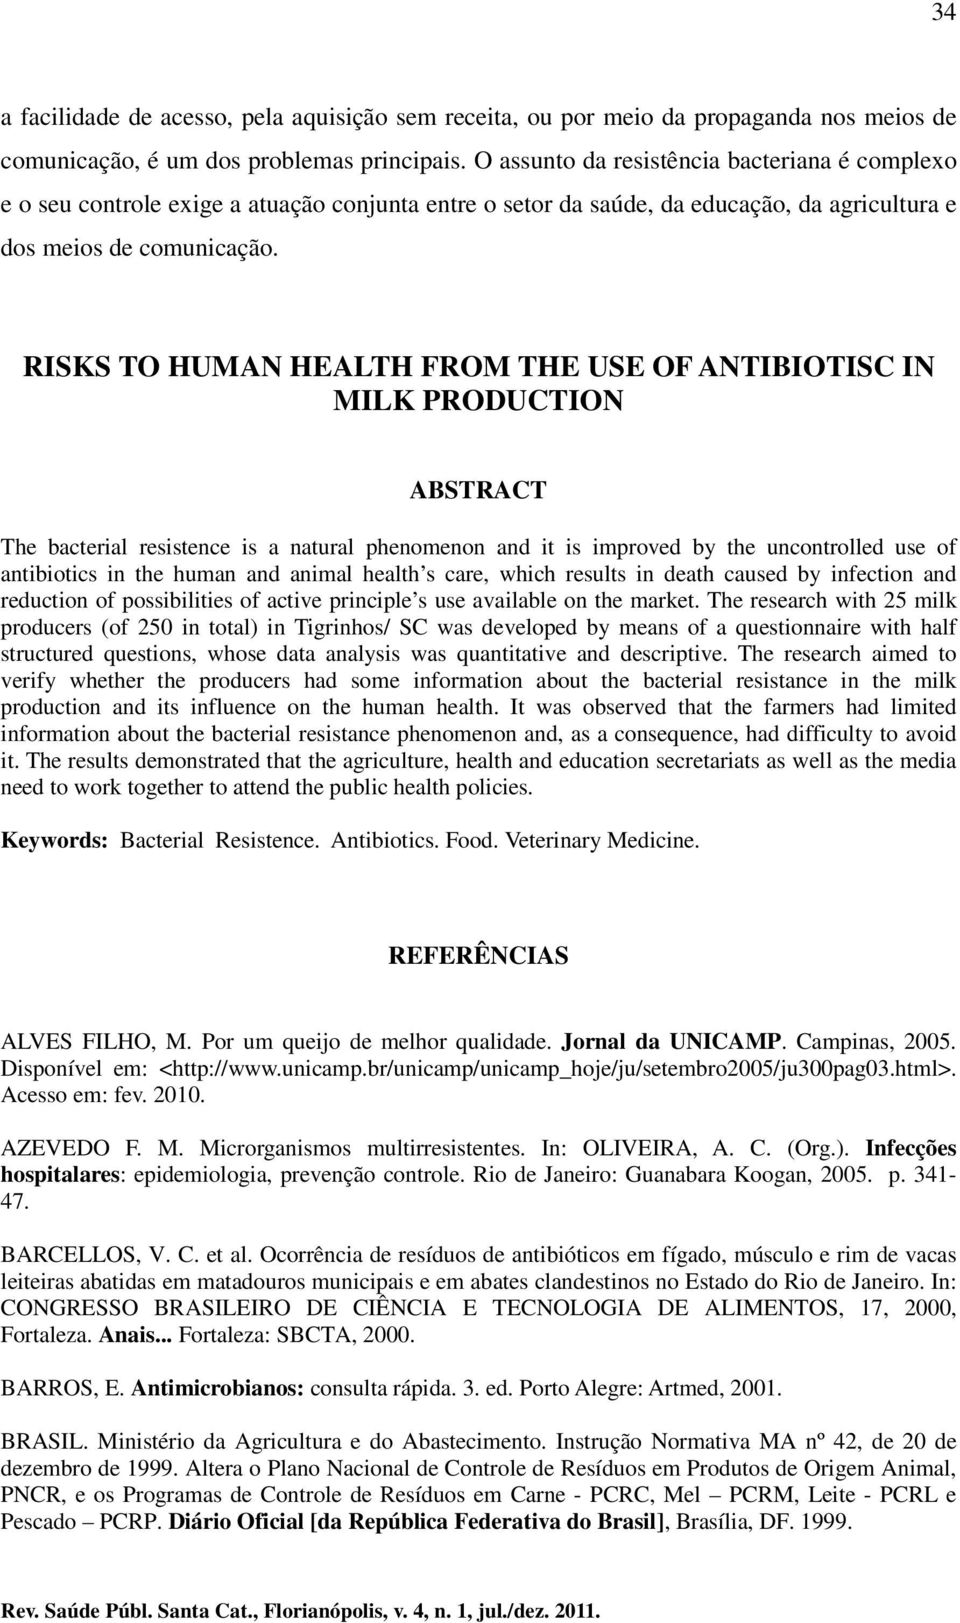 RISKS TO HUMAN HEALTH FROM THE USE OF ANTIBIOTISC IN MILK PRODUCTION ABSTRACT The bacterial resistence is a natural phenomenon and it is improved by the uncontrolled use of antibiotics in the human